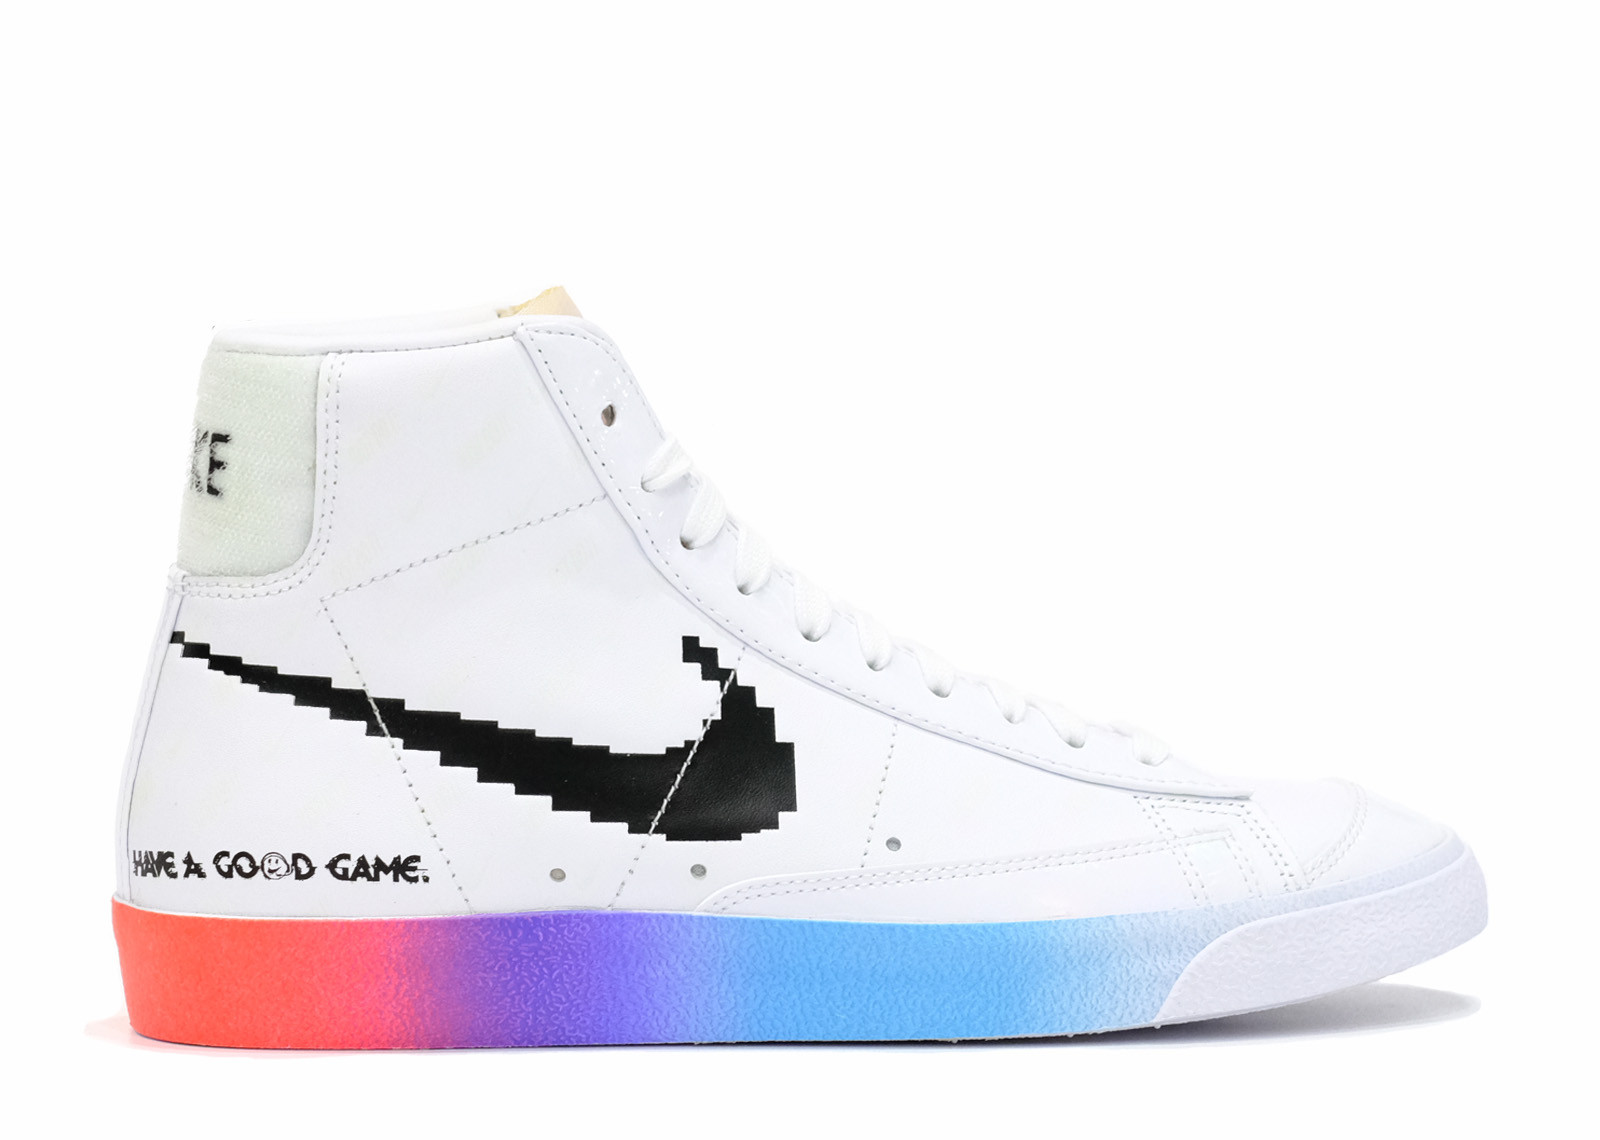 Nike BLAZER MID 77 HAVE A GOOD GAME image 1